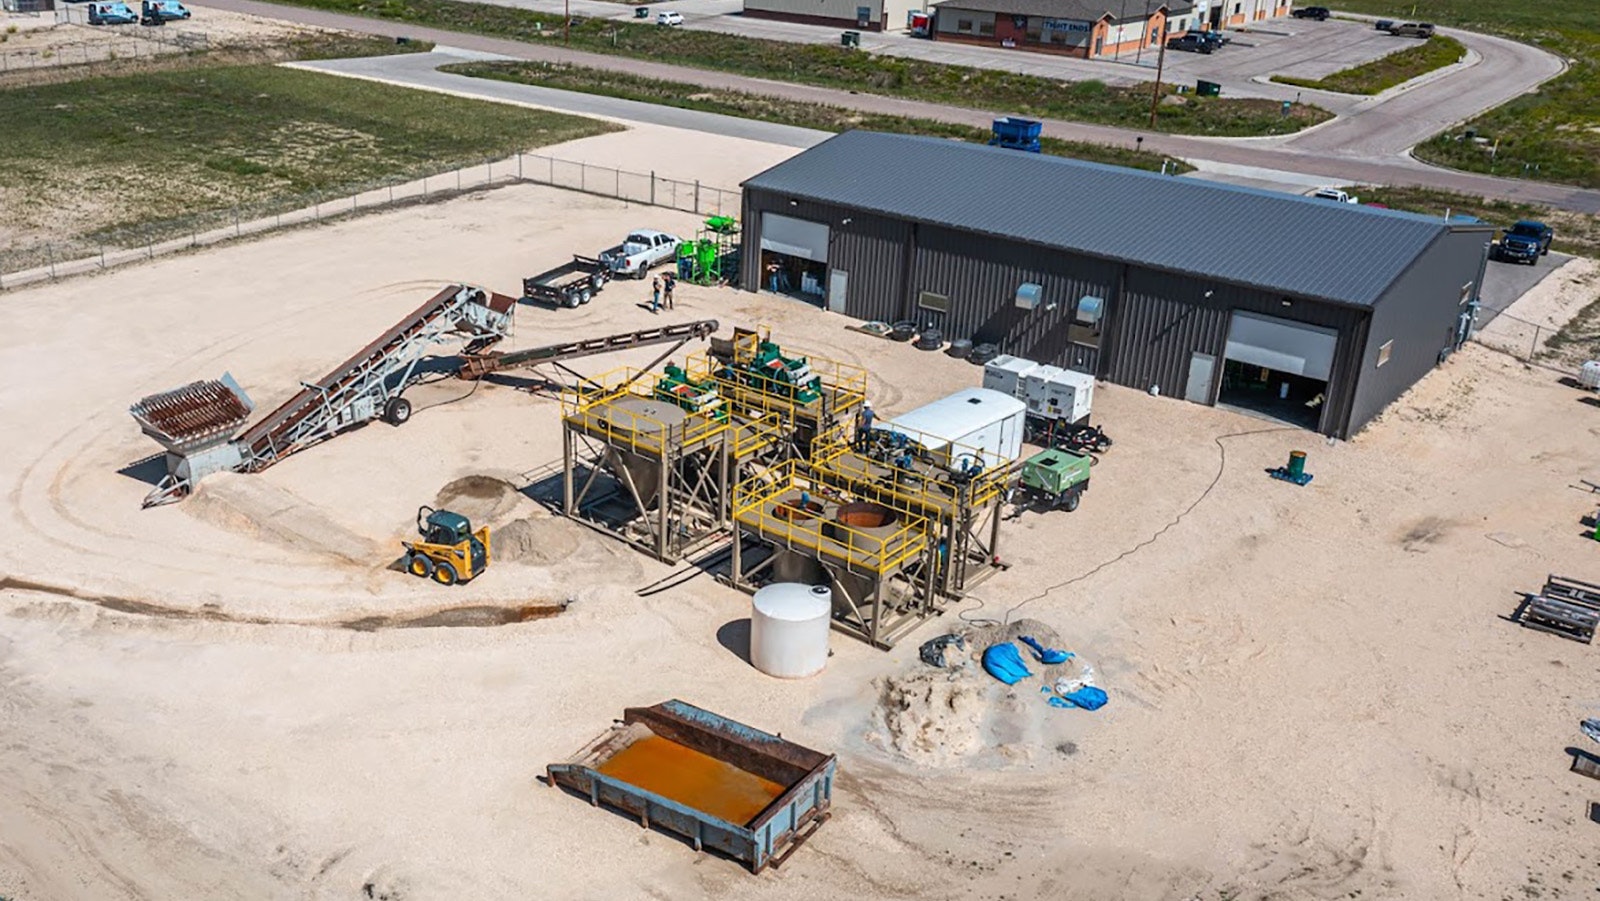 Casper-based Disa Technologies has developed and patented separation process that can be a game-changer for extracting rare earths and remediating abandoned uranium mines.